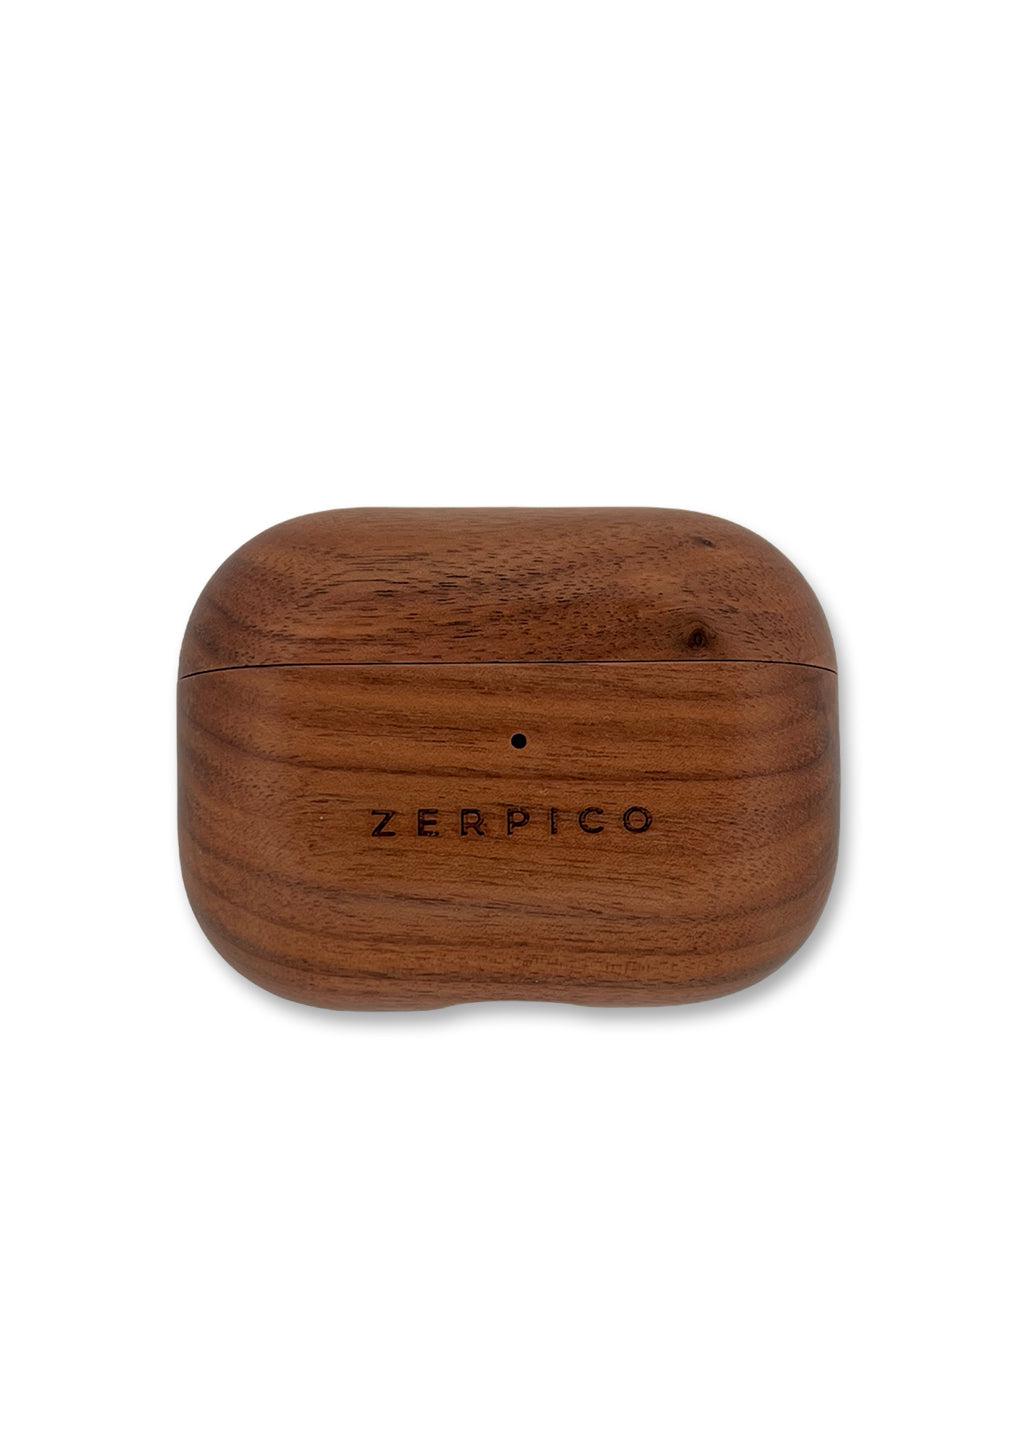 Zerpico Wooden Airpods case. For Airpods pro and 3rd generation.